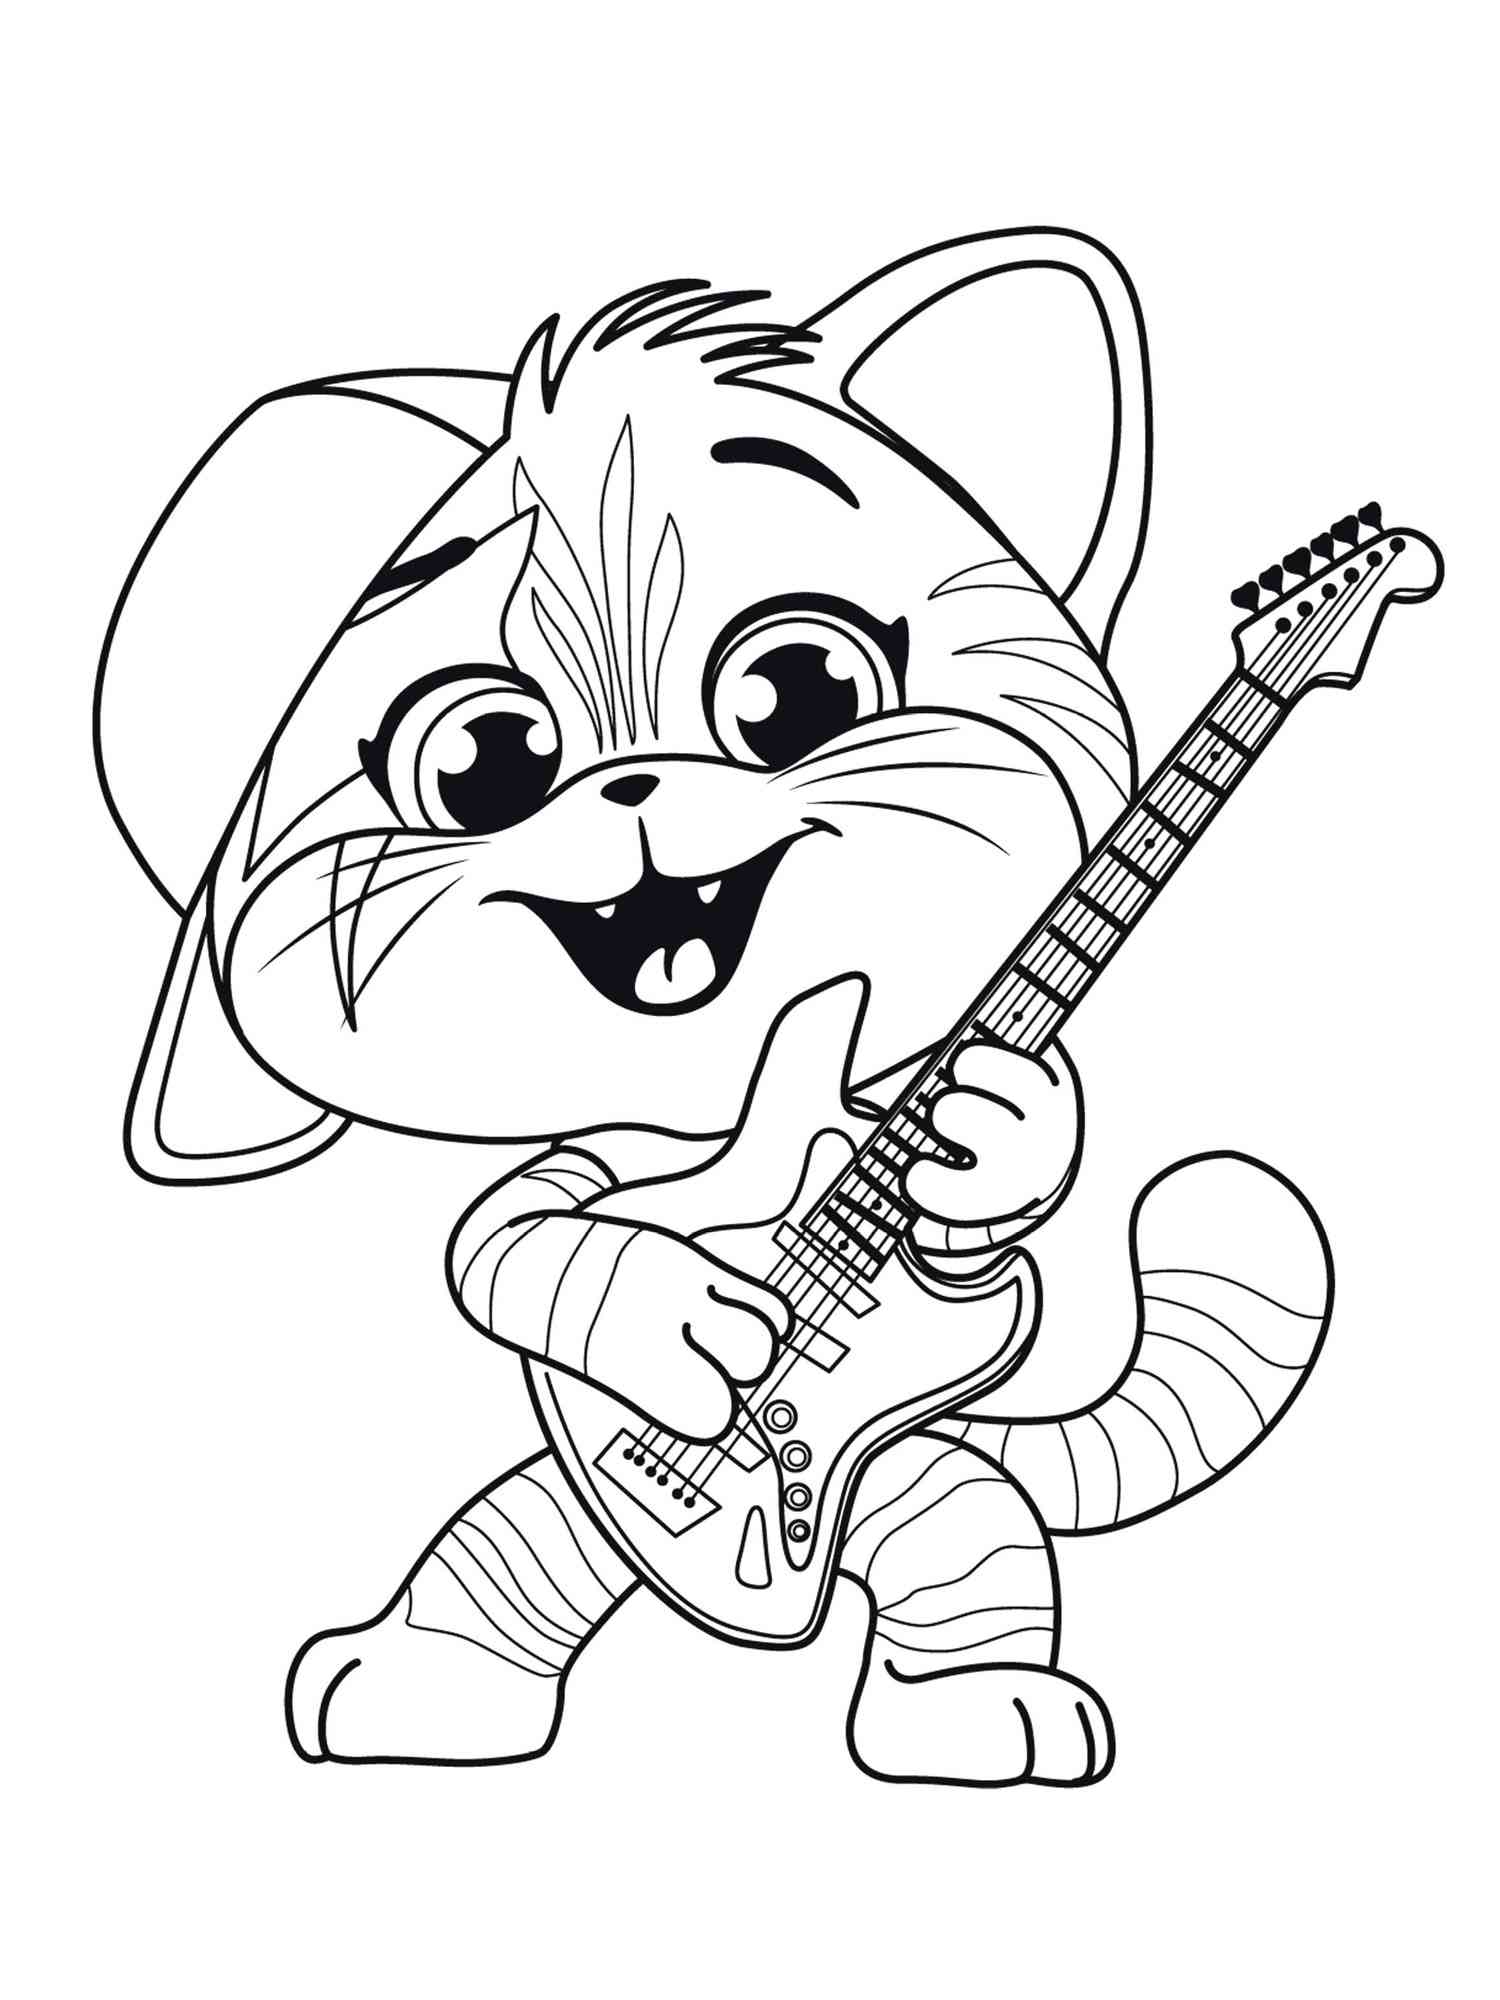 Lampo with guitar coloring page